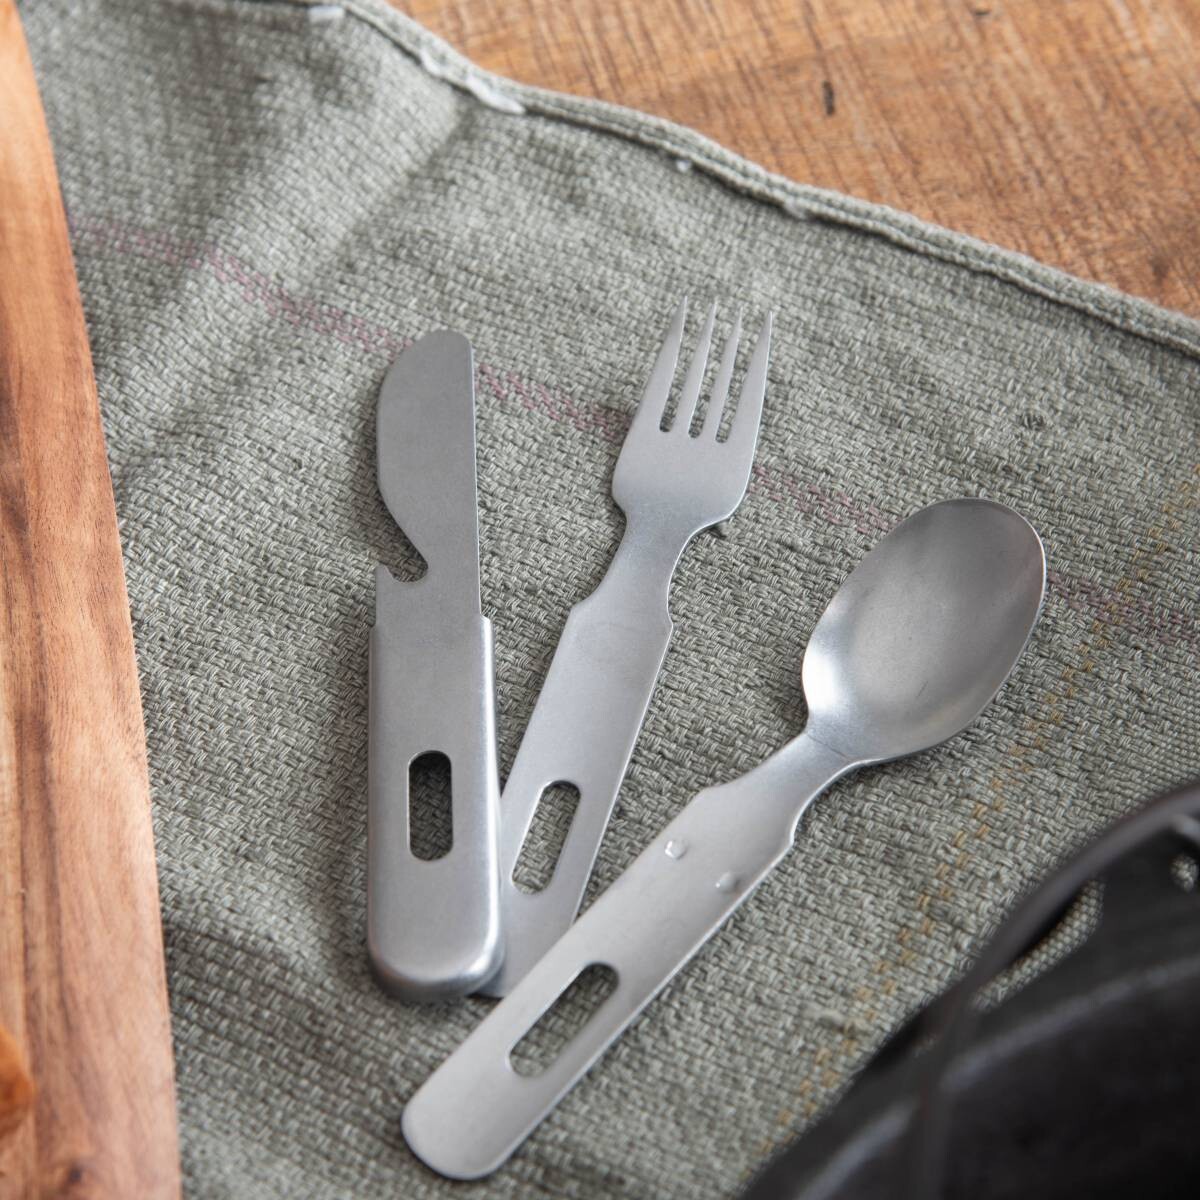 and　set　camping　fork,　spoon）　Japan　cutlery　compact　3pc（knife,